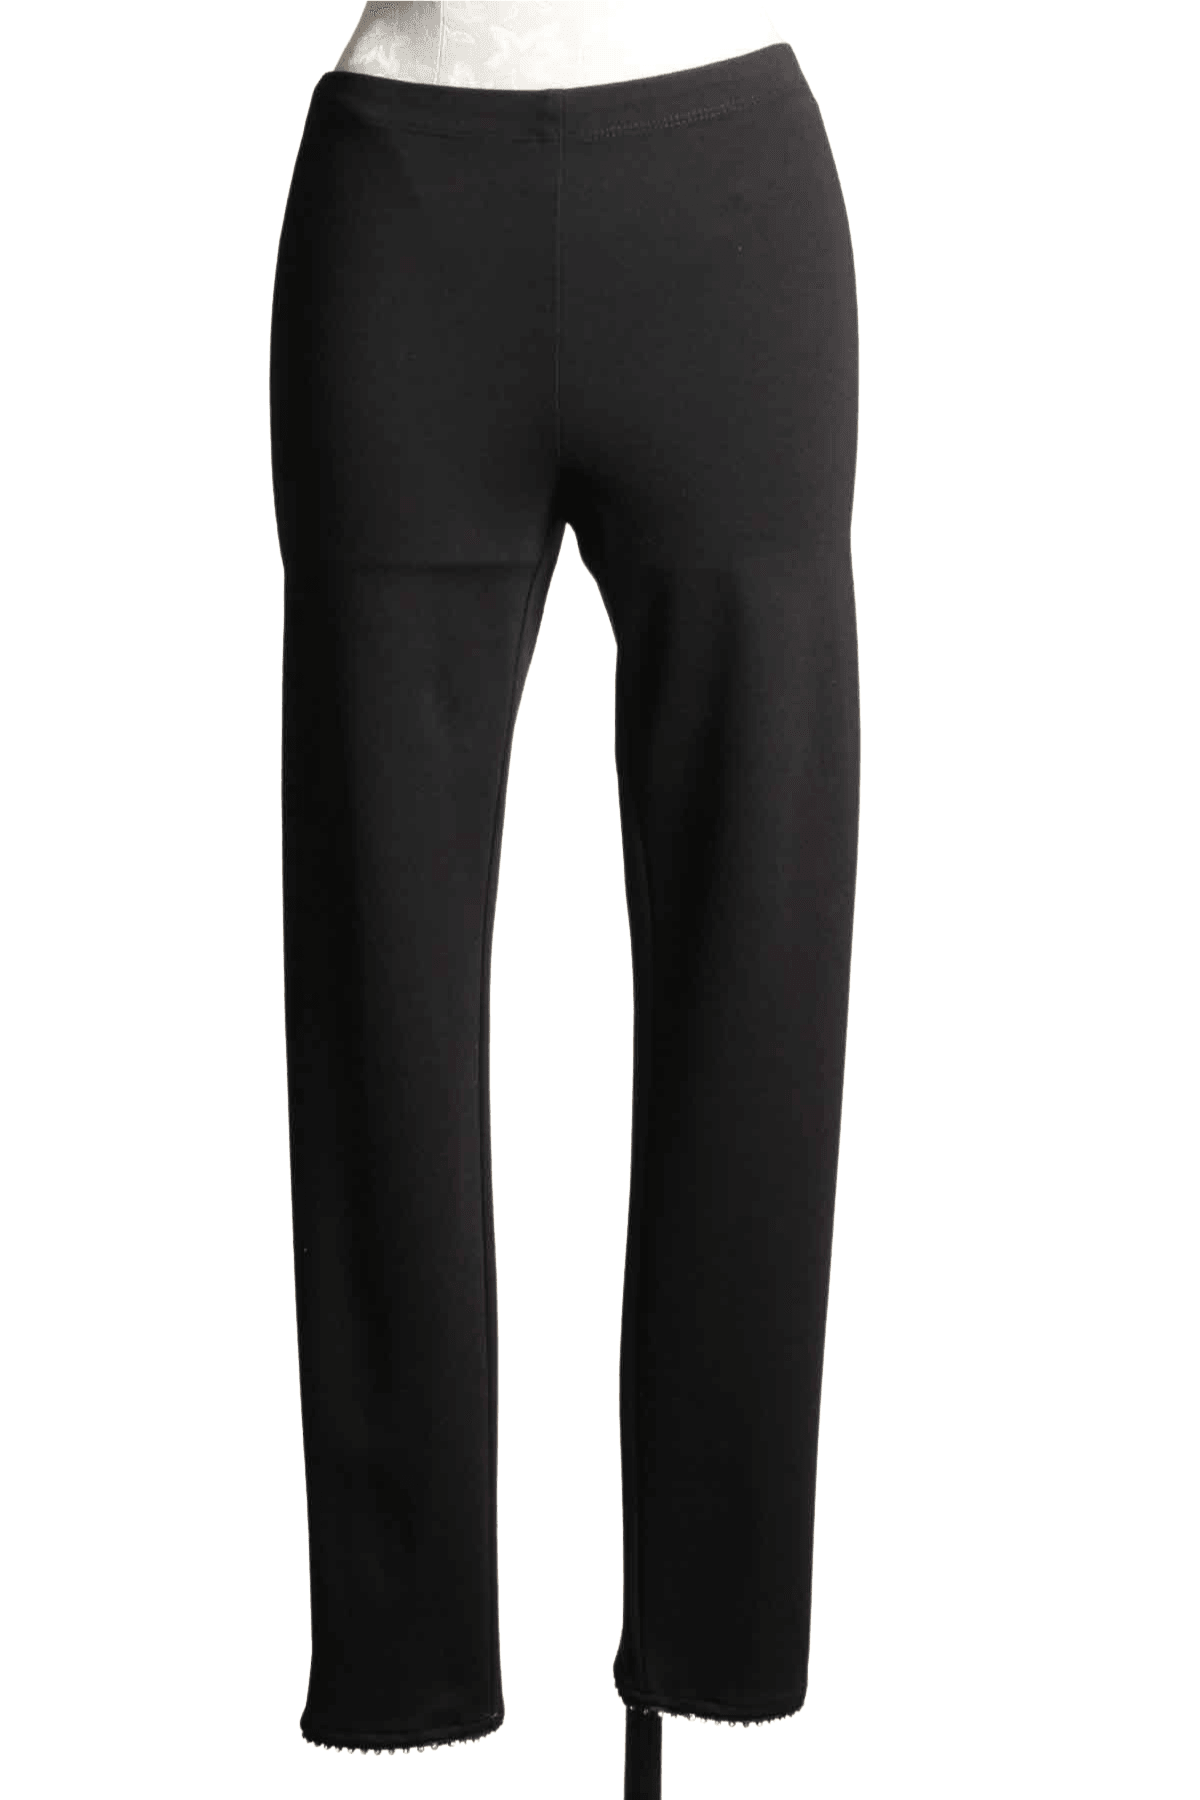 straight leg black pant by Frank Lyman with an open crystal zipper at the bottom